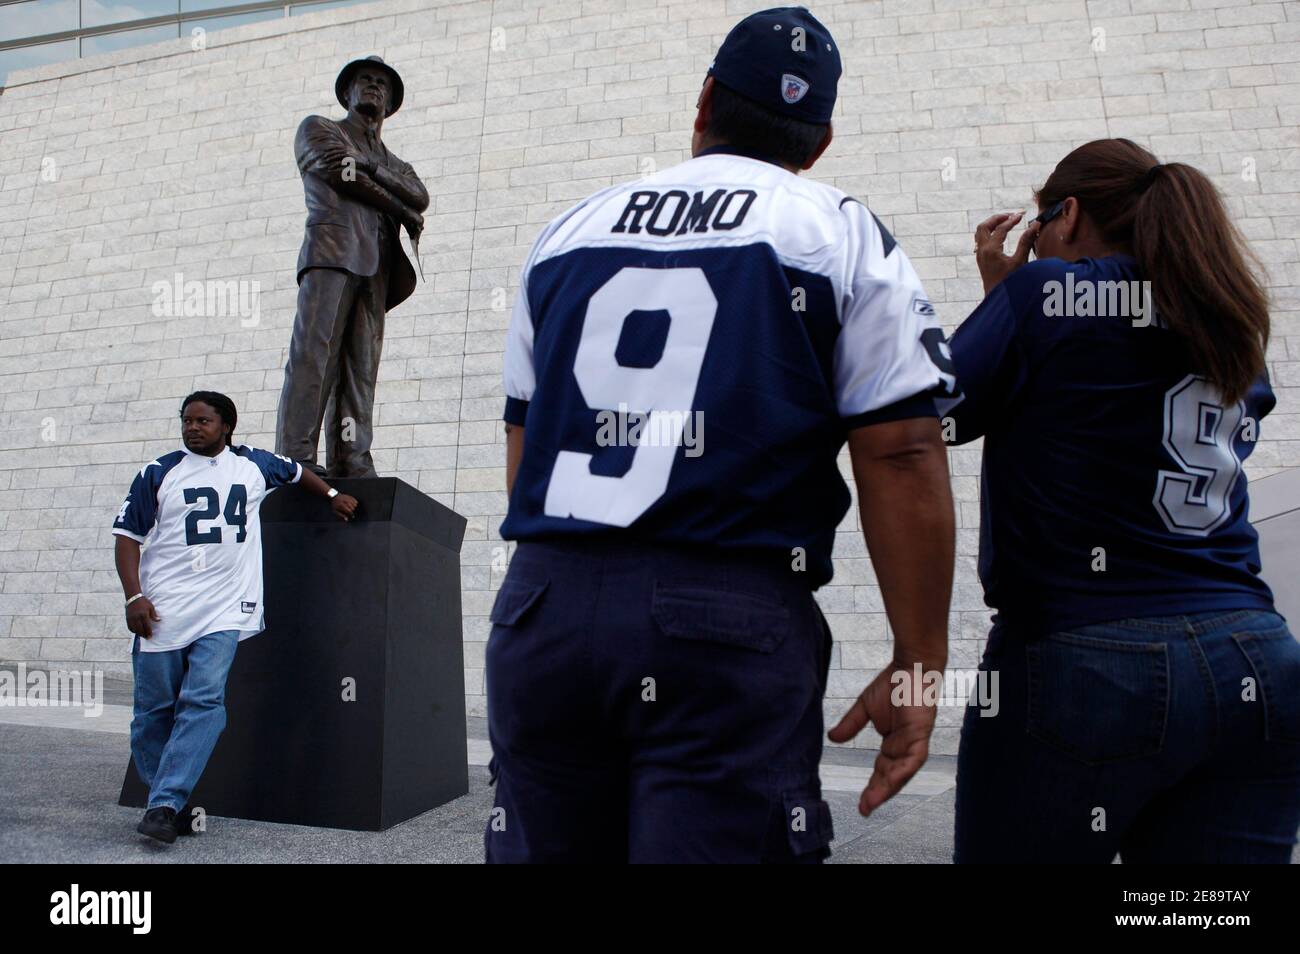 Dallas Cowboys fans take pictures in front of former Cowboys Coach Tom Landry's statue at the Cowboys Stadium prior to Cowboys' home opener in their new stadium, against the New York Giants in Arlington, Texas, September 20, 2009.     REUTERS/Jessica Rinaldi (UNITED STATES SPORT FOOTBALL) Stock Photo